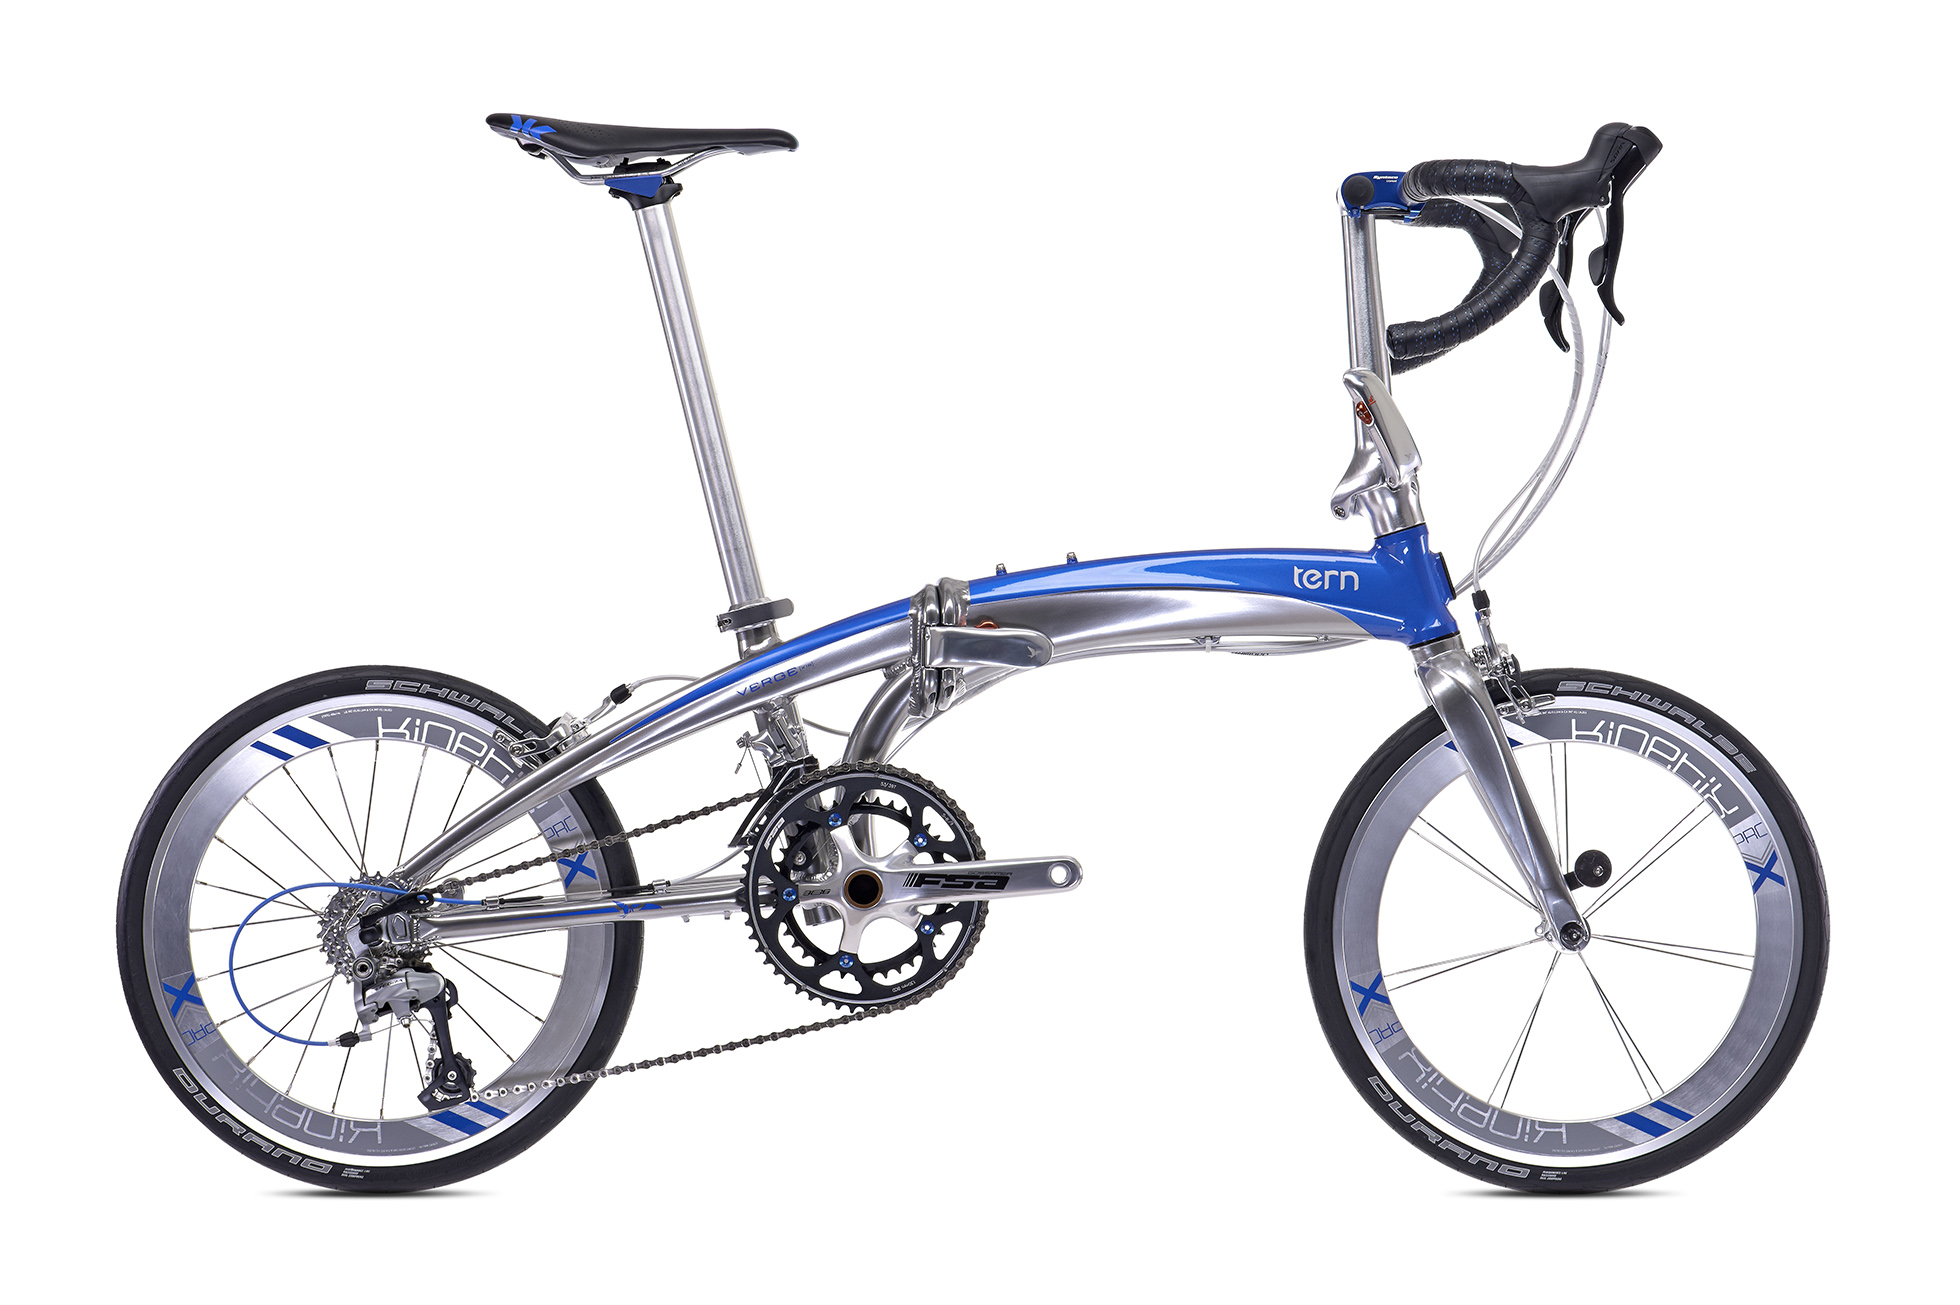 Verge X18: Our Top Folding Bike, Built For Speed